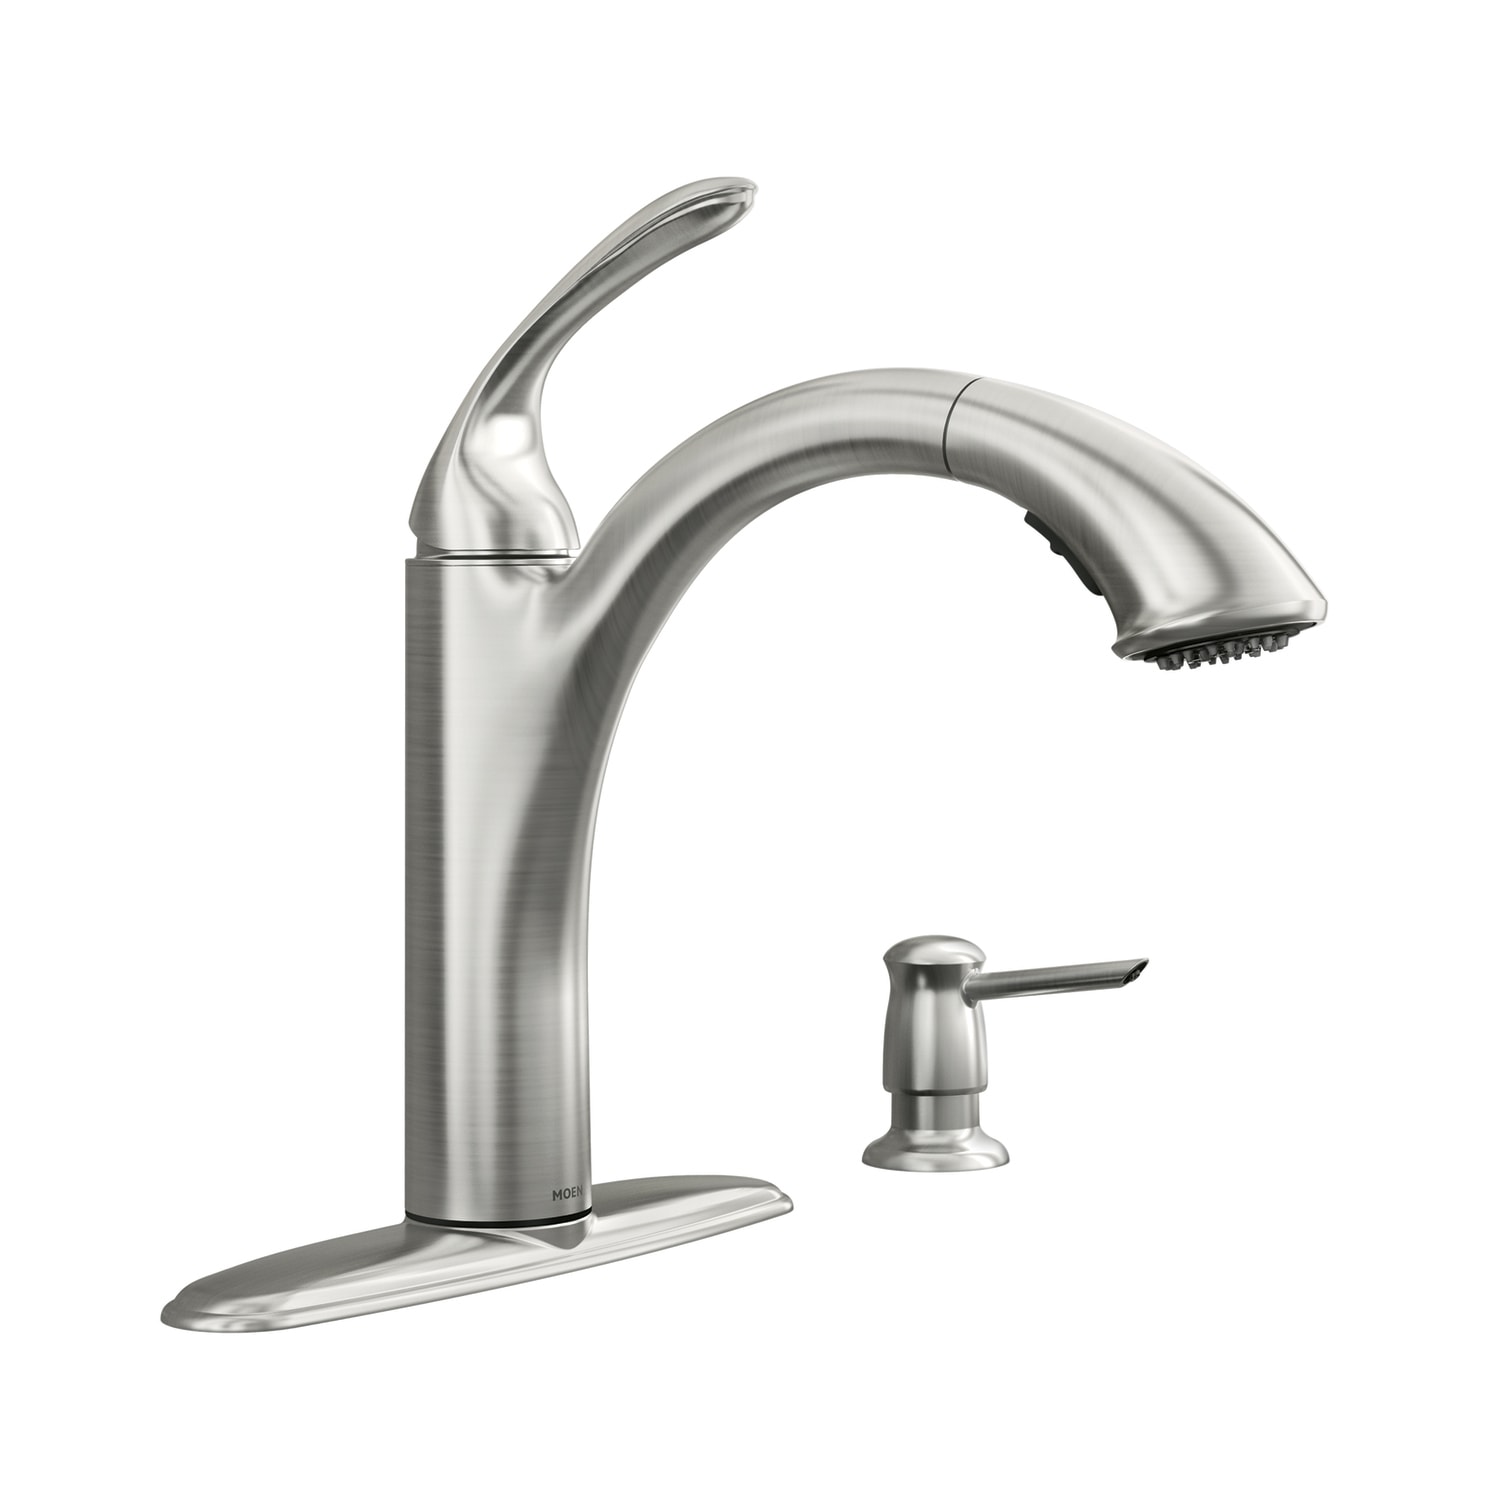 Moen Kinzel Spot Resist Stainless 1 Handle Pull Out Kitchen Faucet Deck Plate Included In The Kitchen Faucets Department At Lowes Com